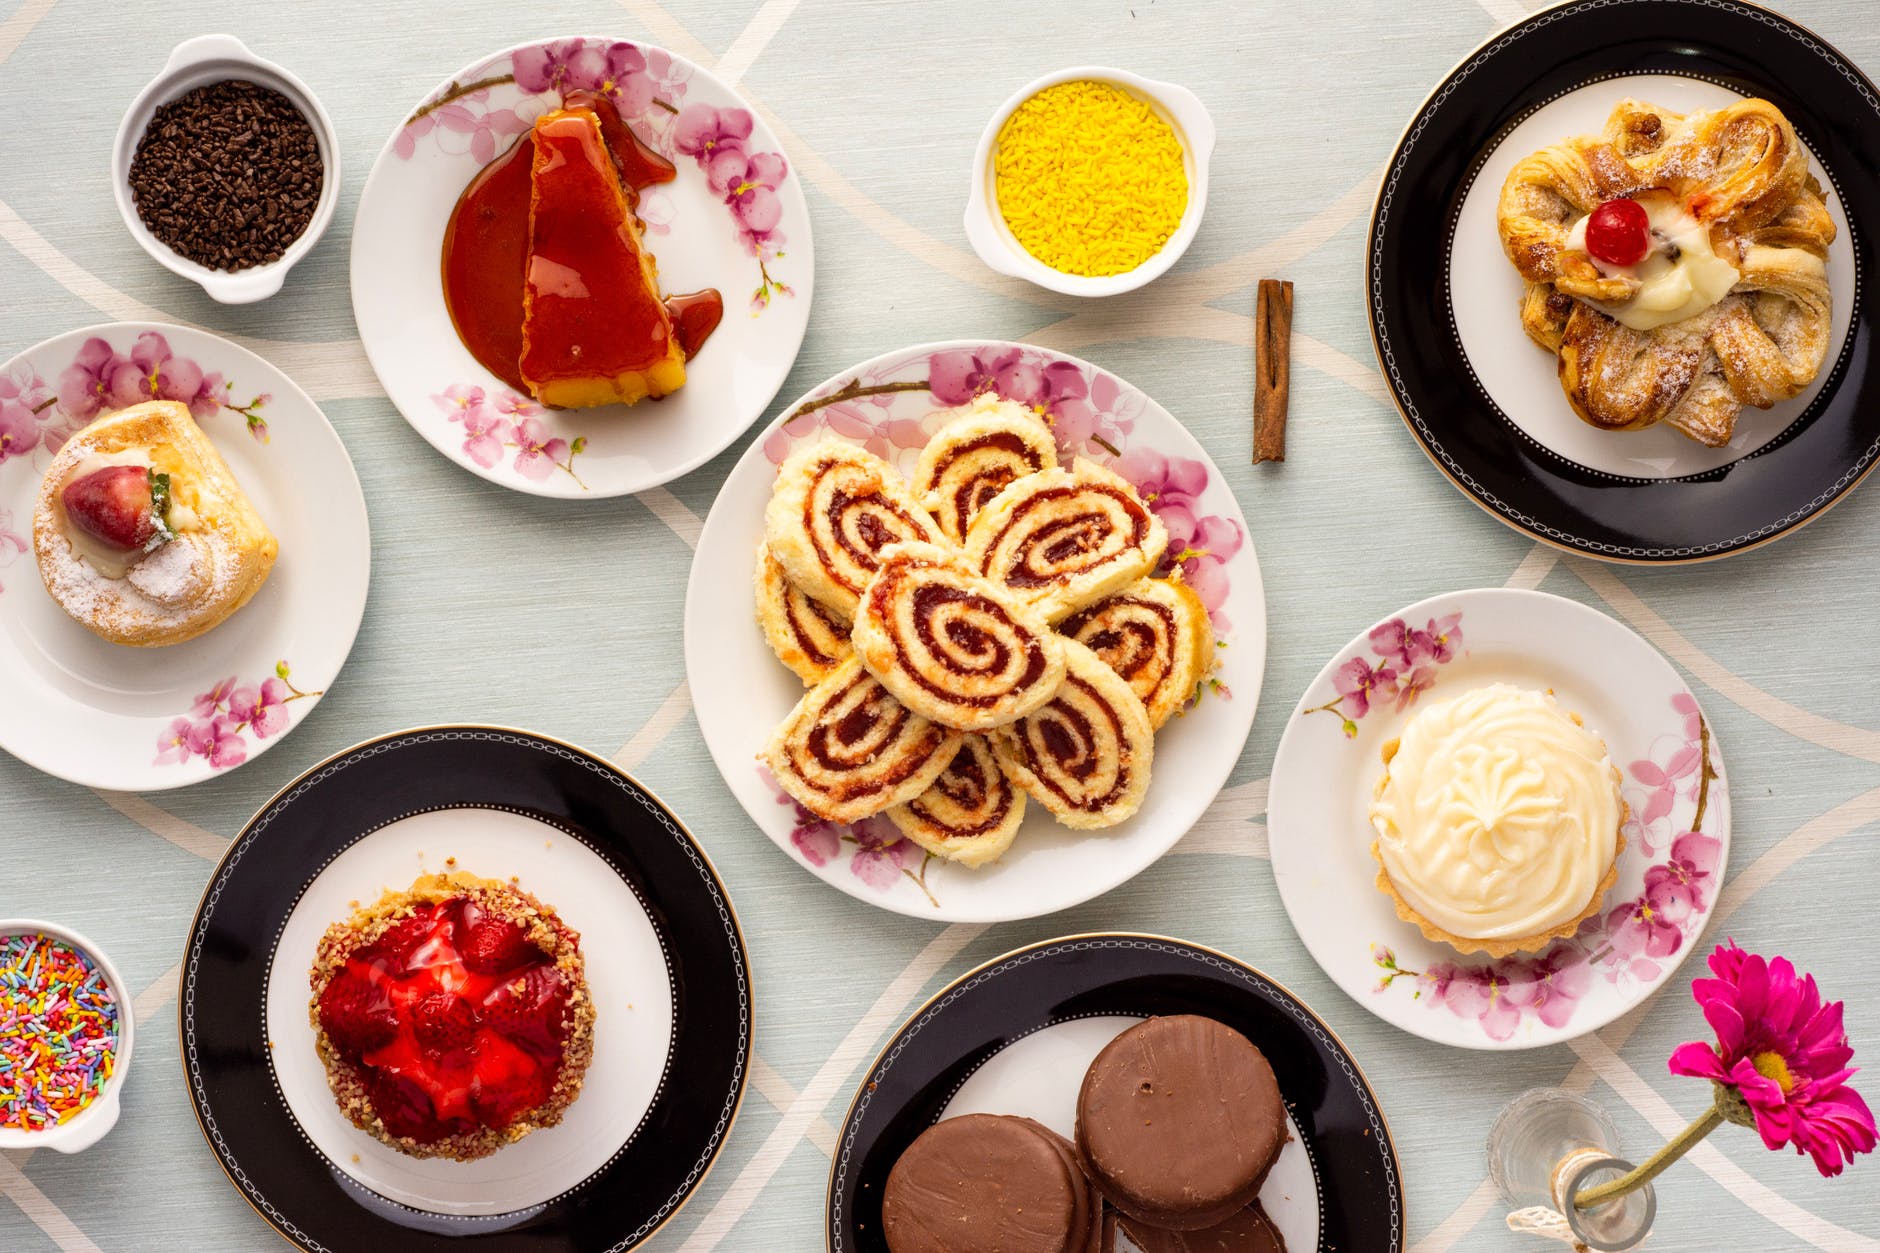 variety of baked and dessert foods on plates